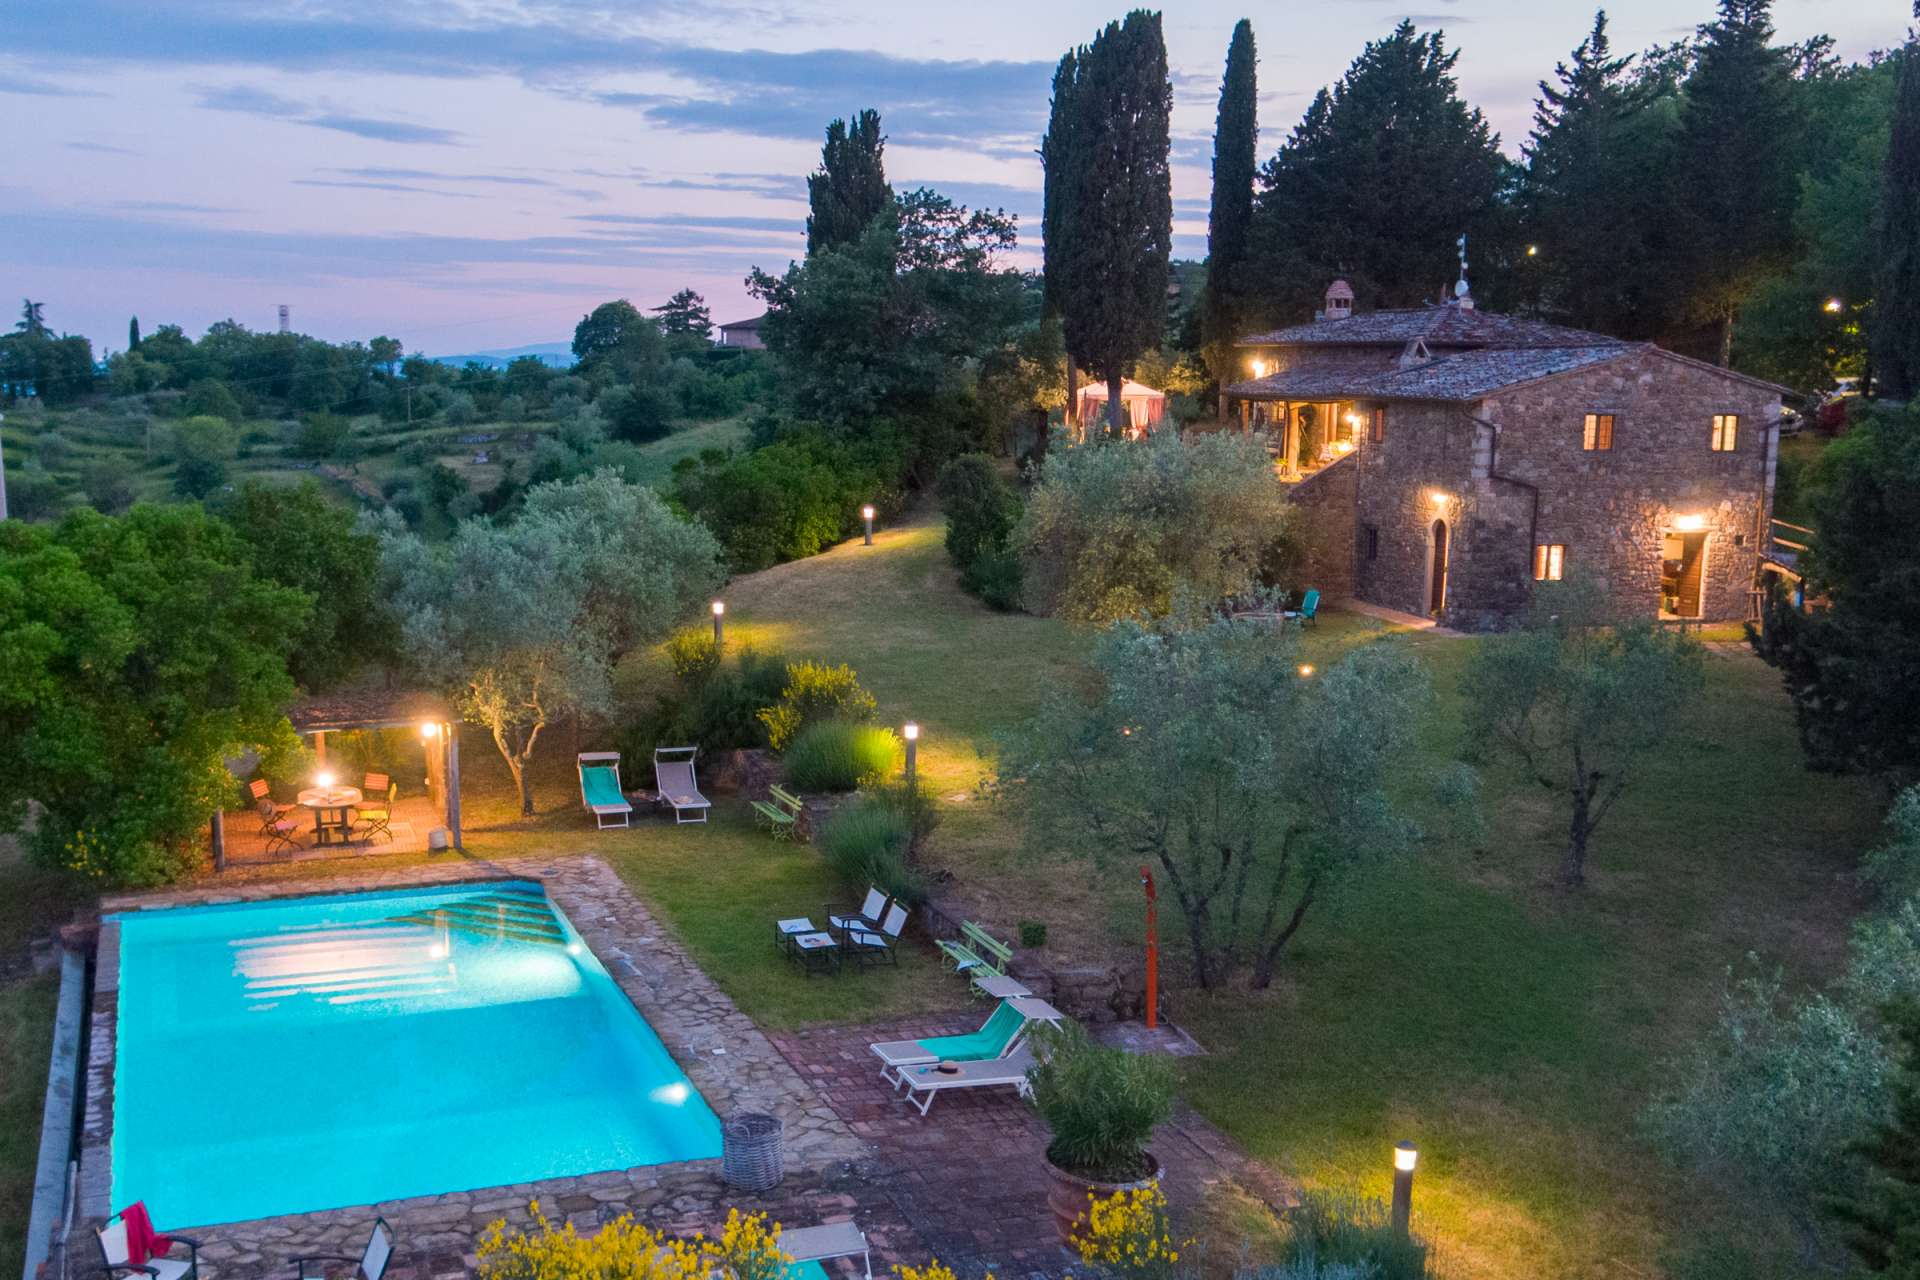 Villas for rent in tuscany coast